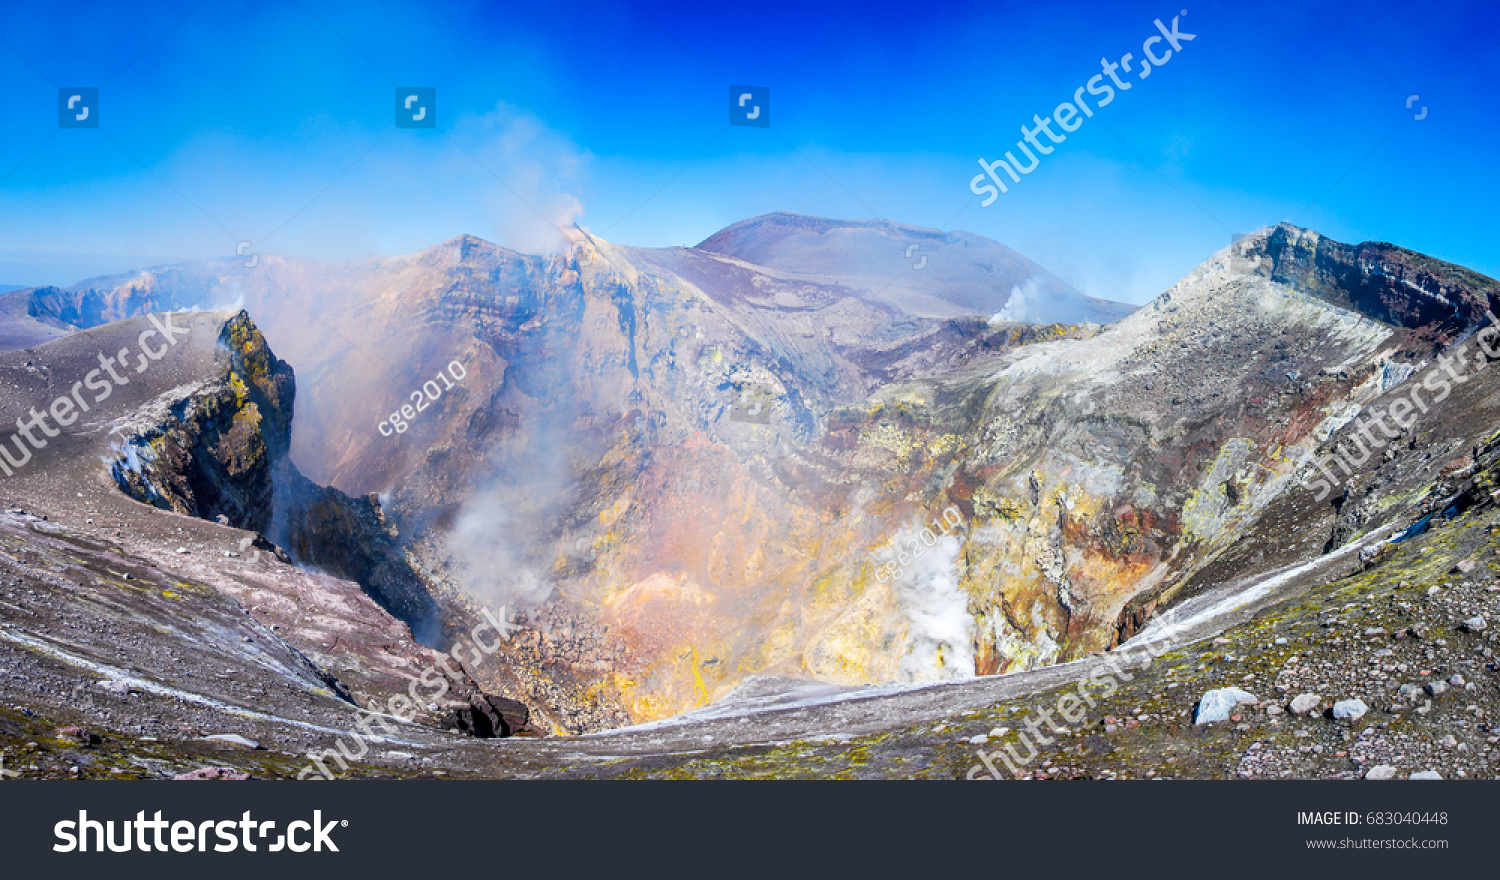 Mount Etna, Sicily -  Tallest active volcano of Europe 3329 m in Italy. #683040448